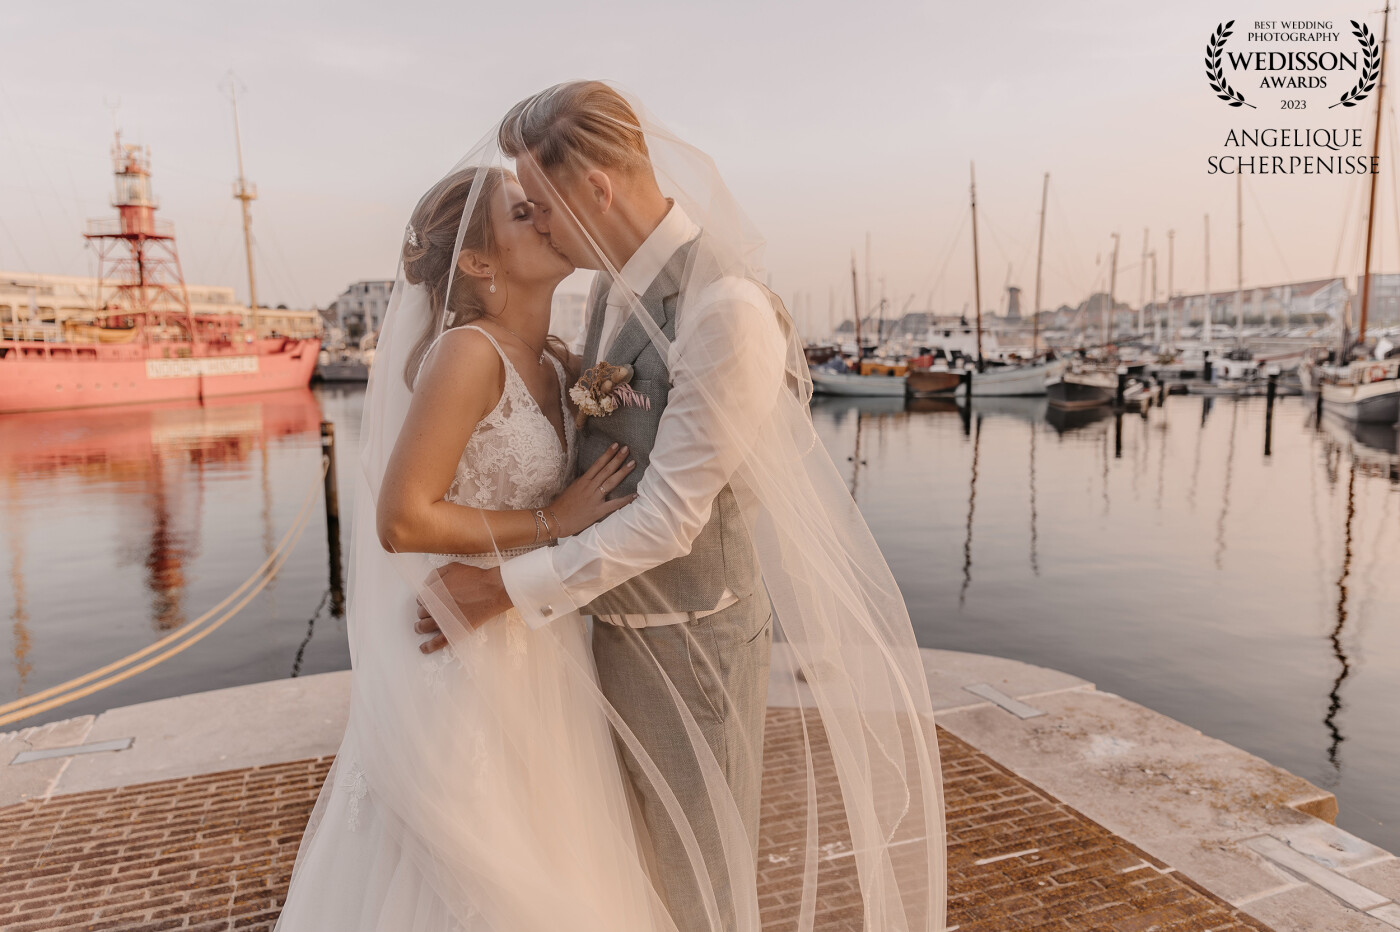 Truly a beautiful bridal couple. They were open to everything and I love veil photos so much. It was a really beautiful evening during golden hour.<br />
<br />
This wedding venue is really breathtaking!